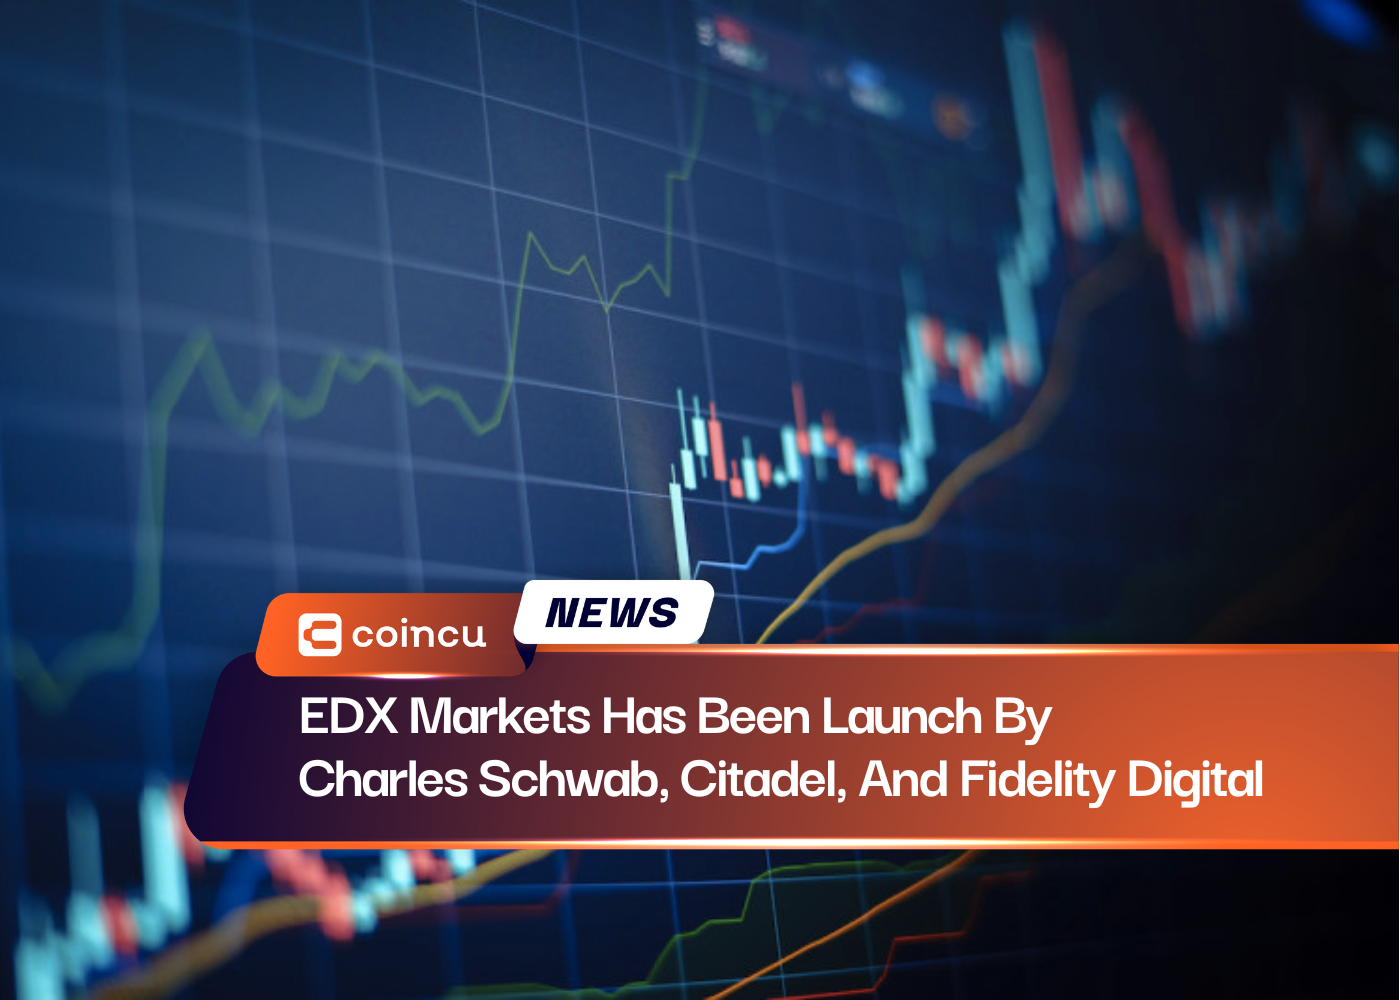 EDX Markets Has Been Launch By Charles Schwab, Citadel, And Fidelity Digital